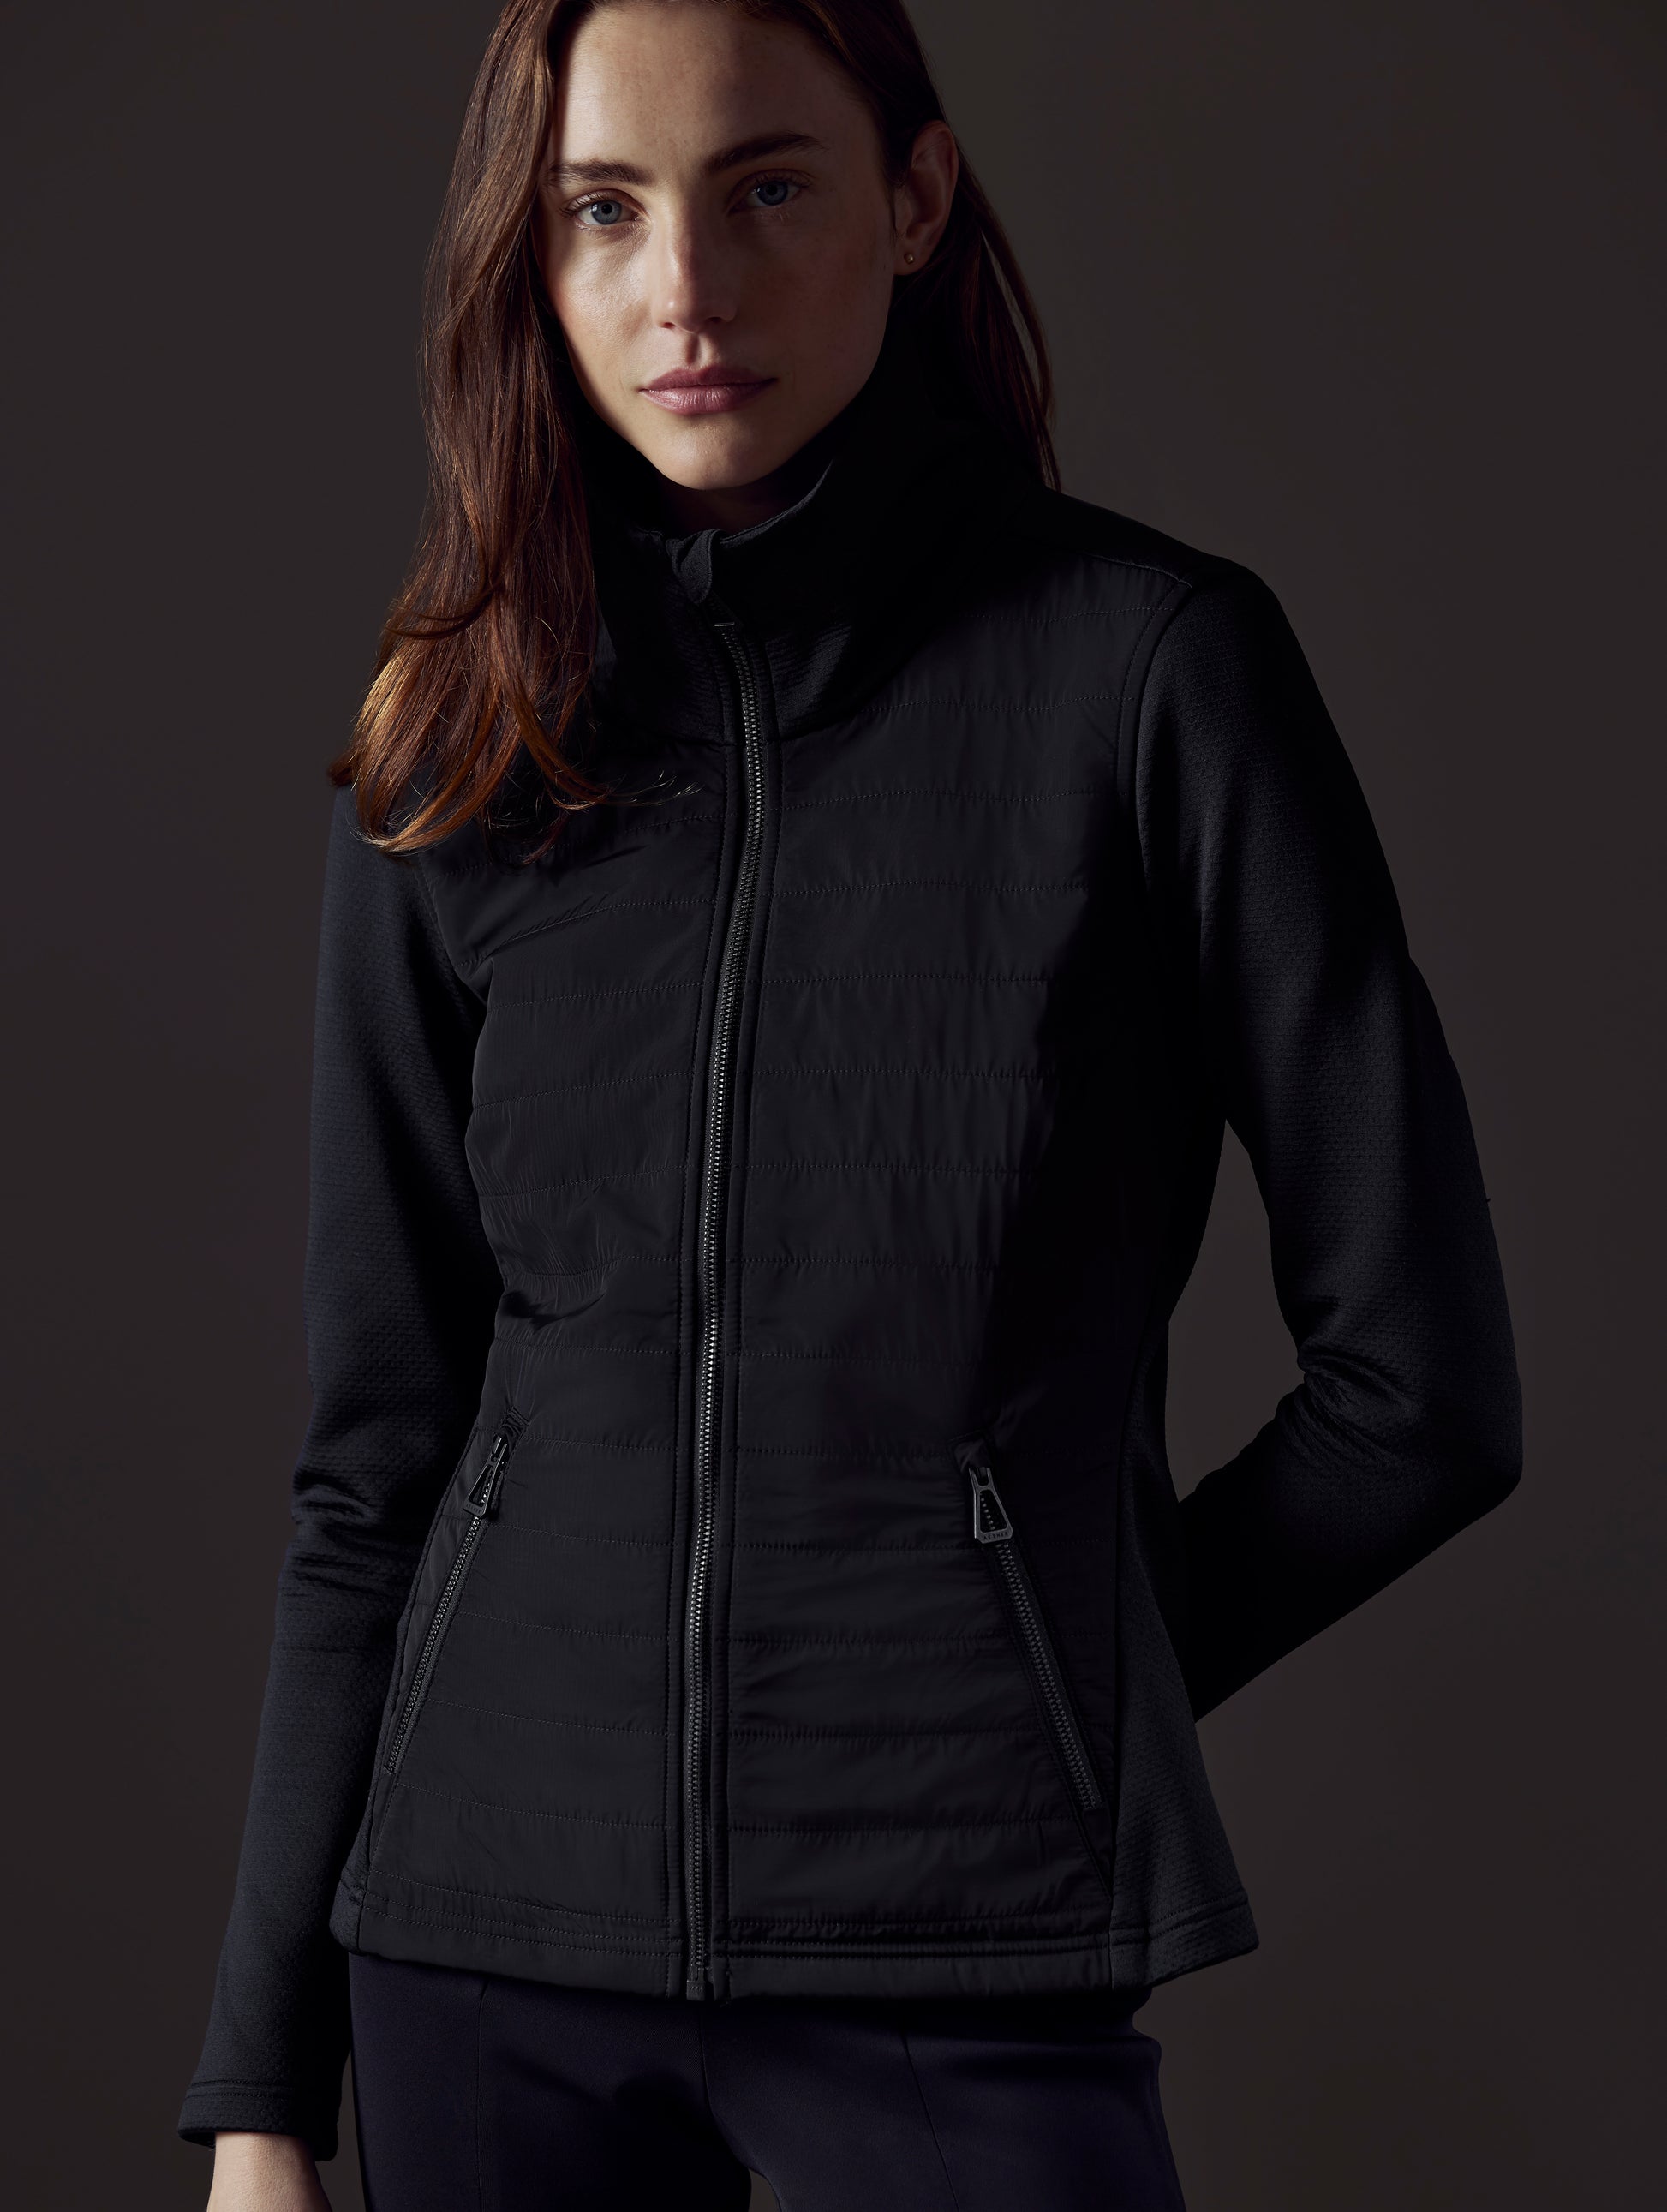 Woman wearing black full-zip from AETHER Apparel